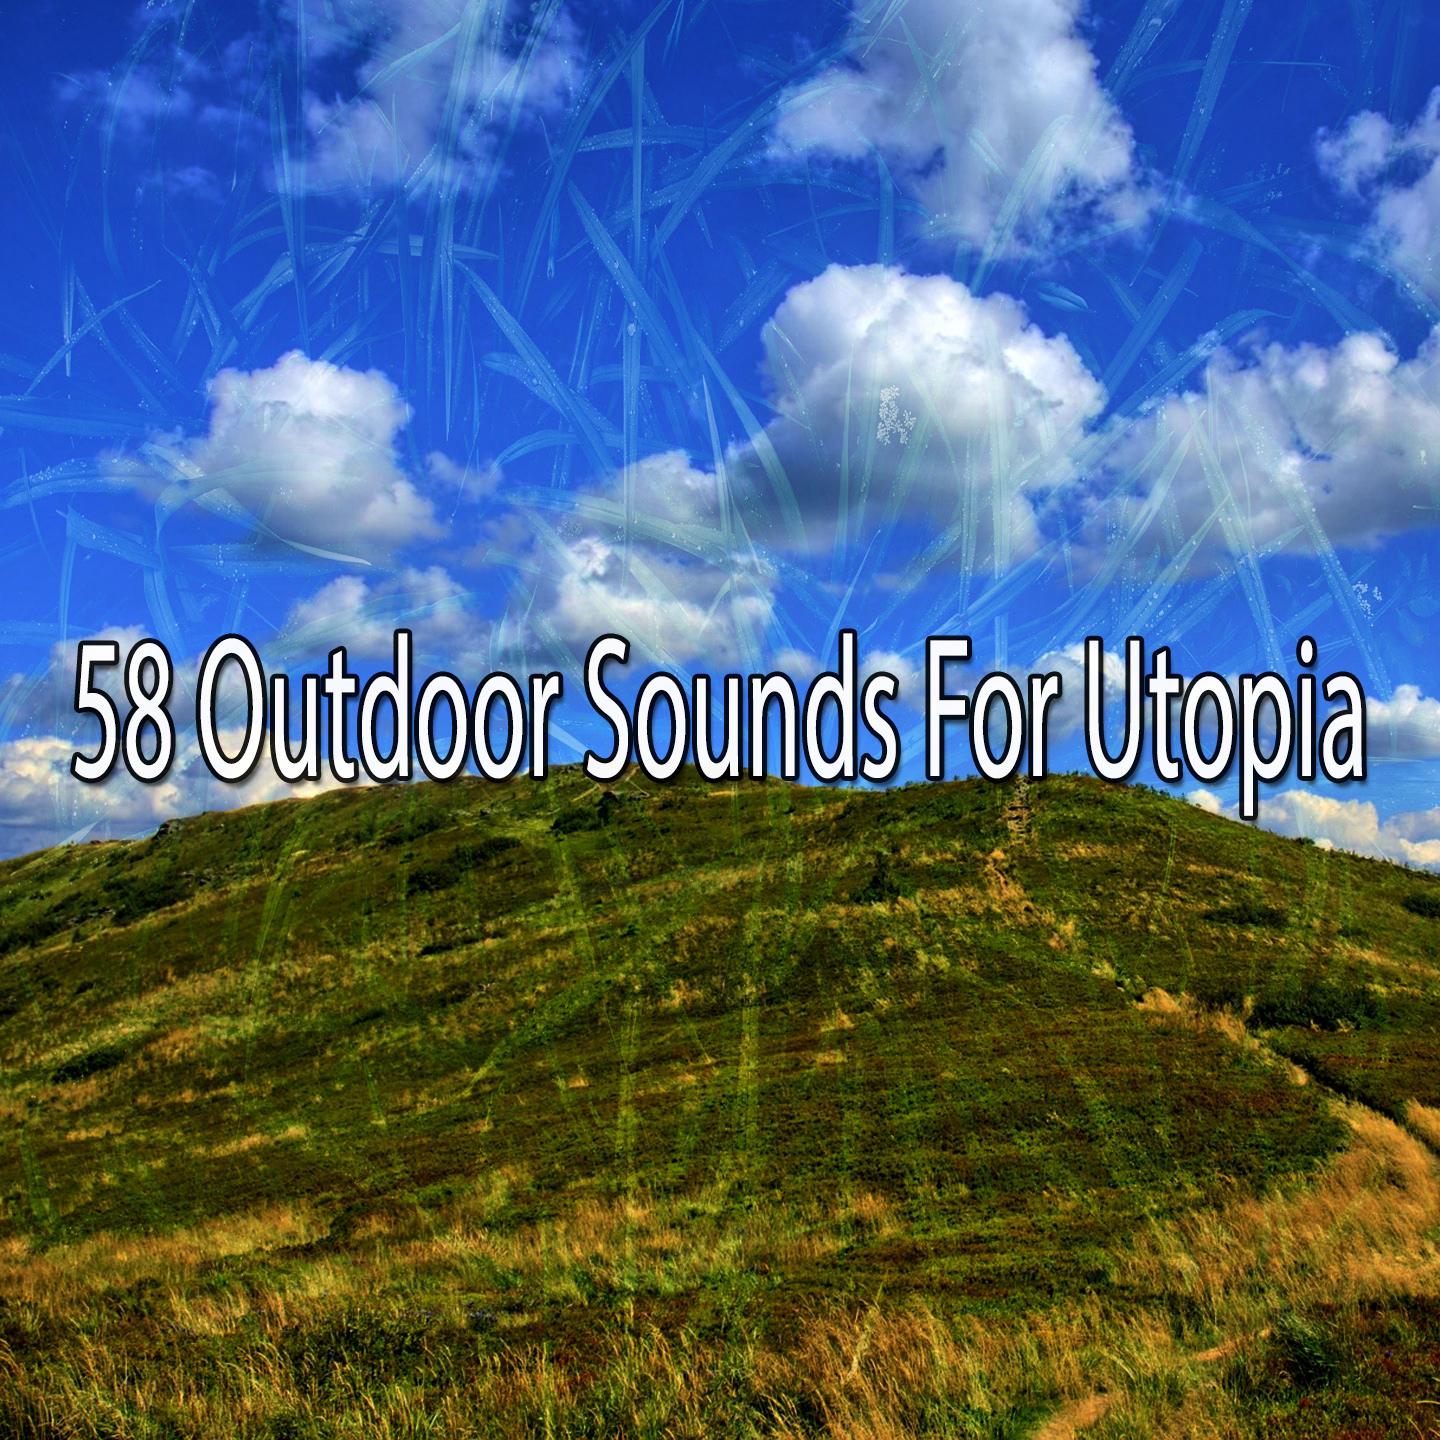 58 Outdoor Sounds for Utopia